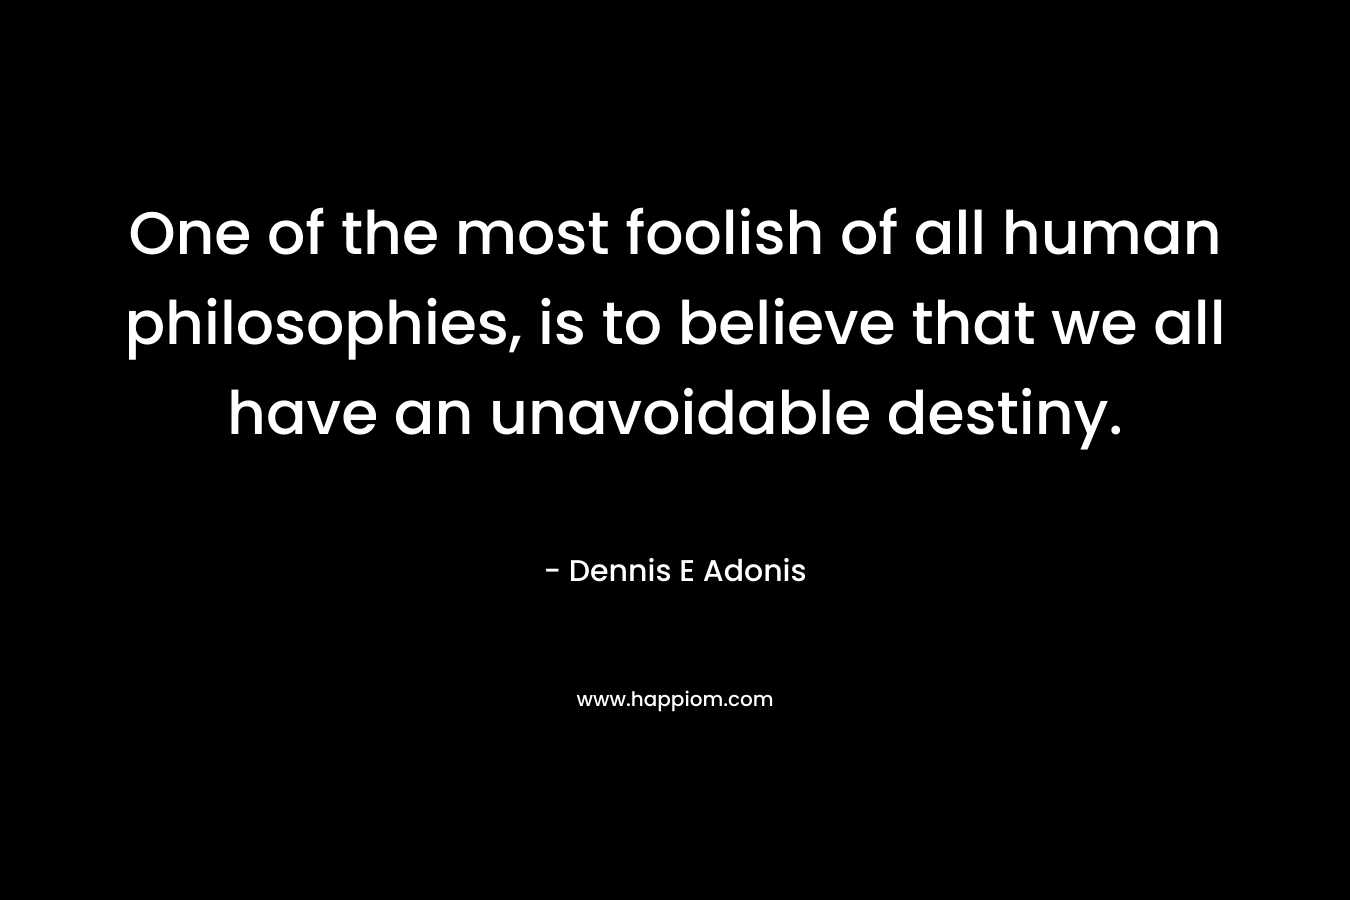 One of the most foolish of all human philosophies, is to believe that we all have an unavoidable destiny.